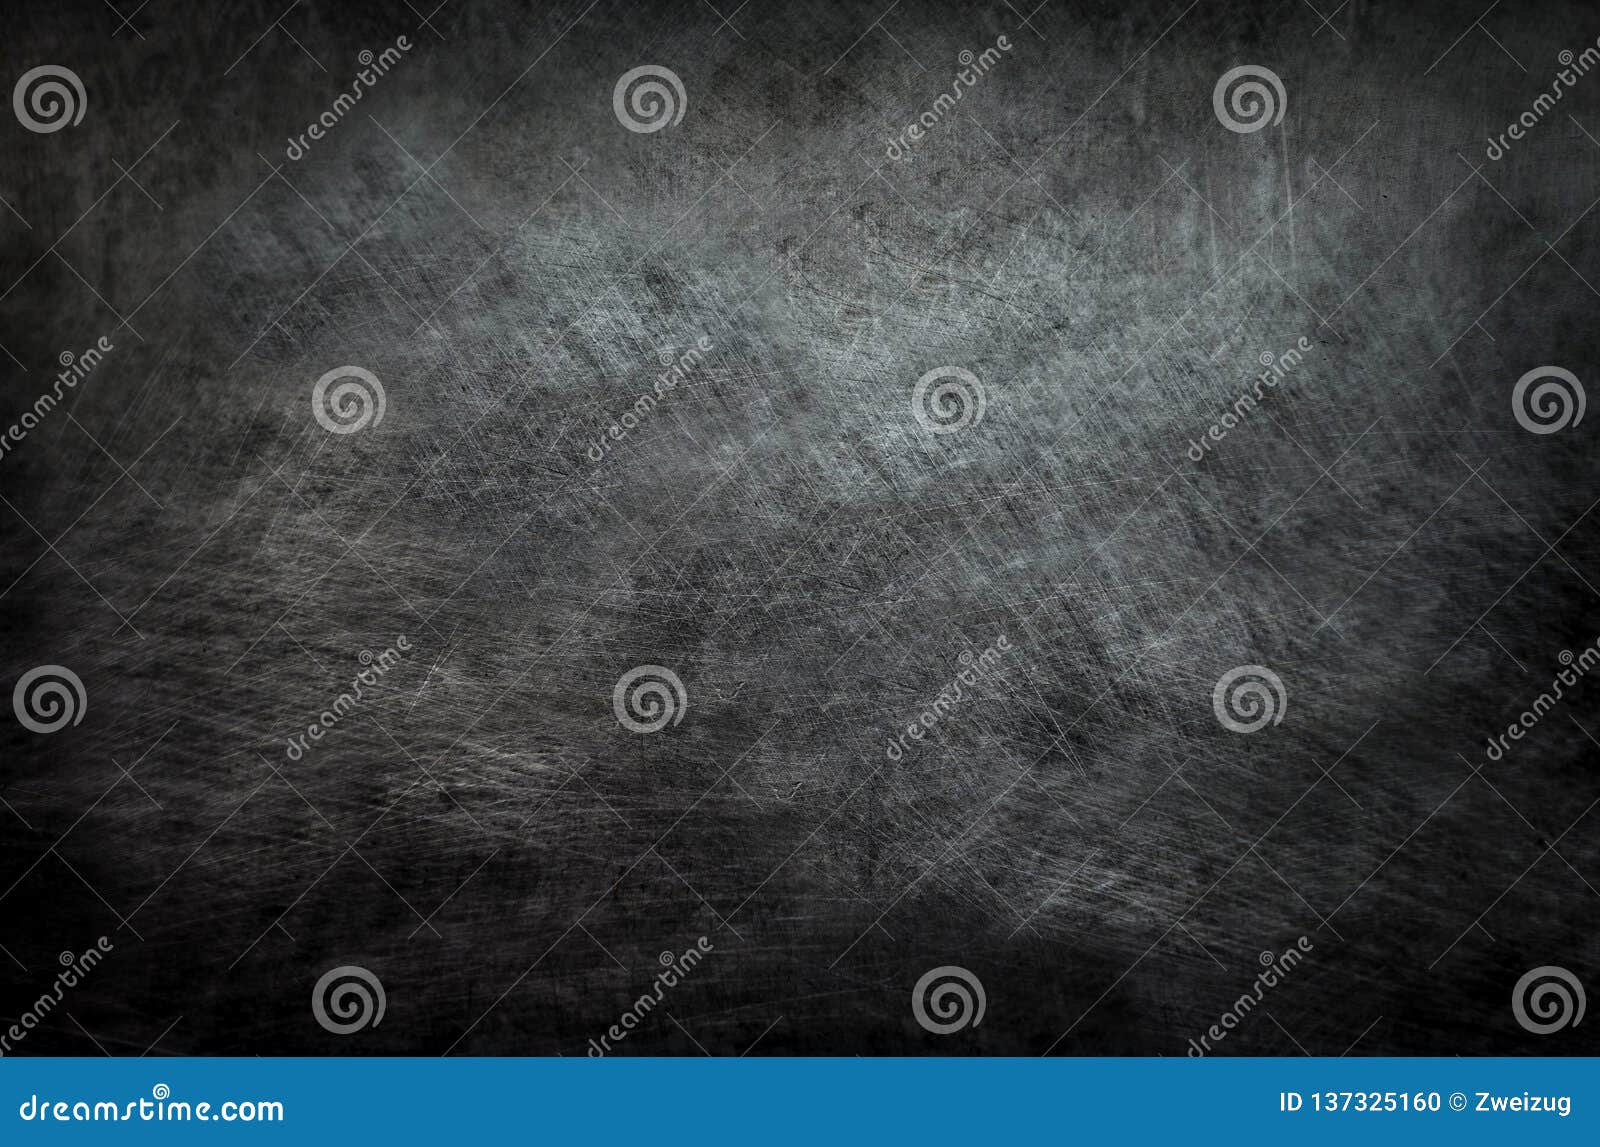 black board scratch conceptual pattern surface abstract texture background